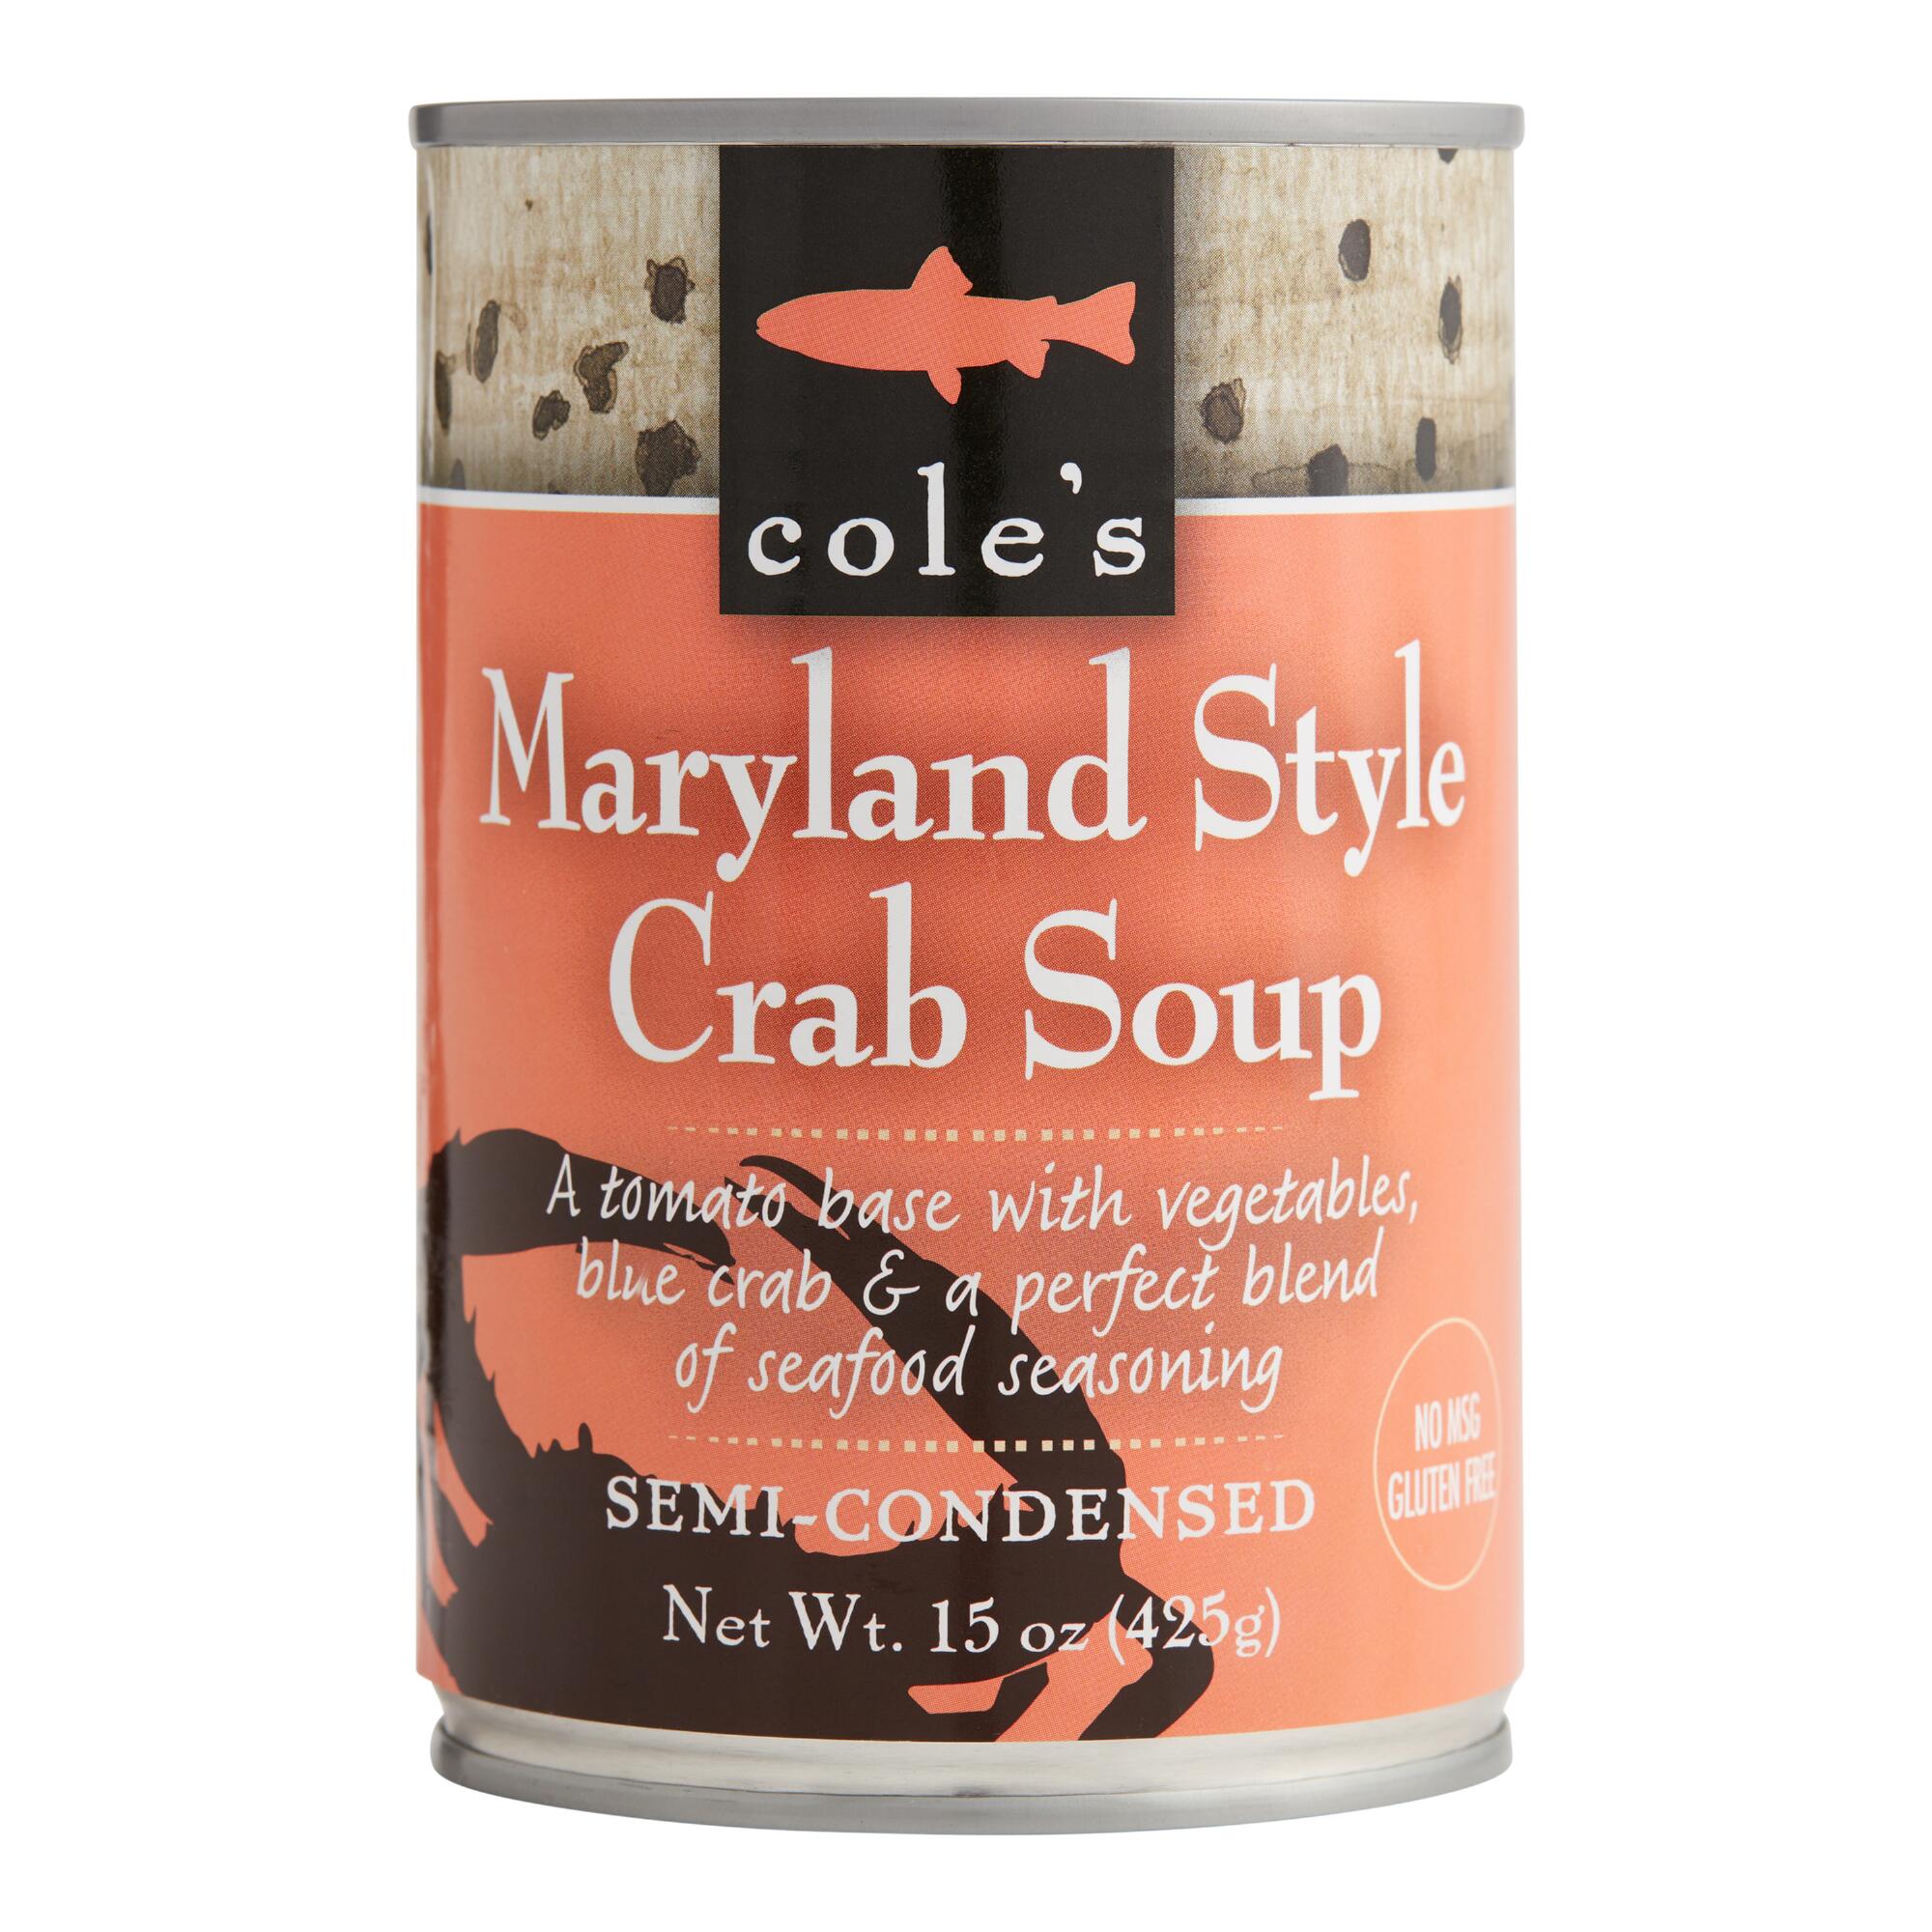 Cole's Maryland Style Crab Soup by World Market